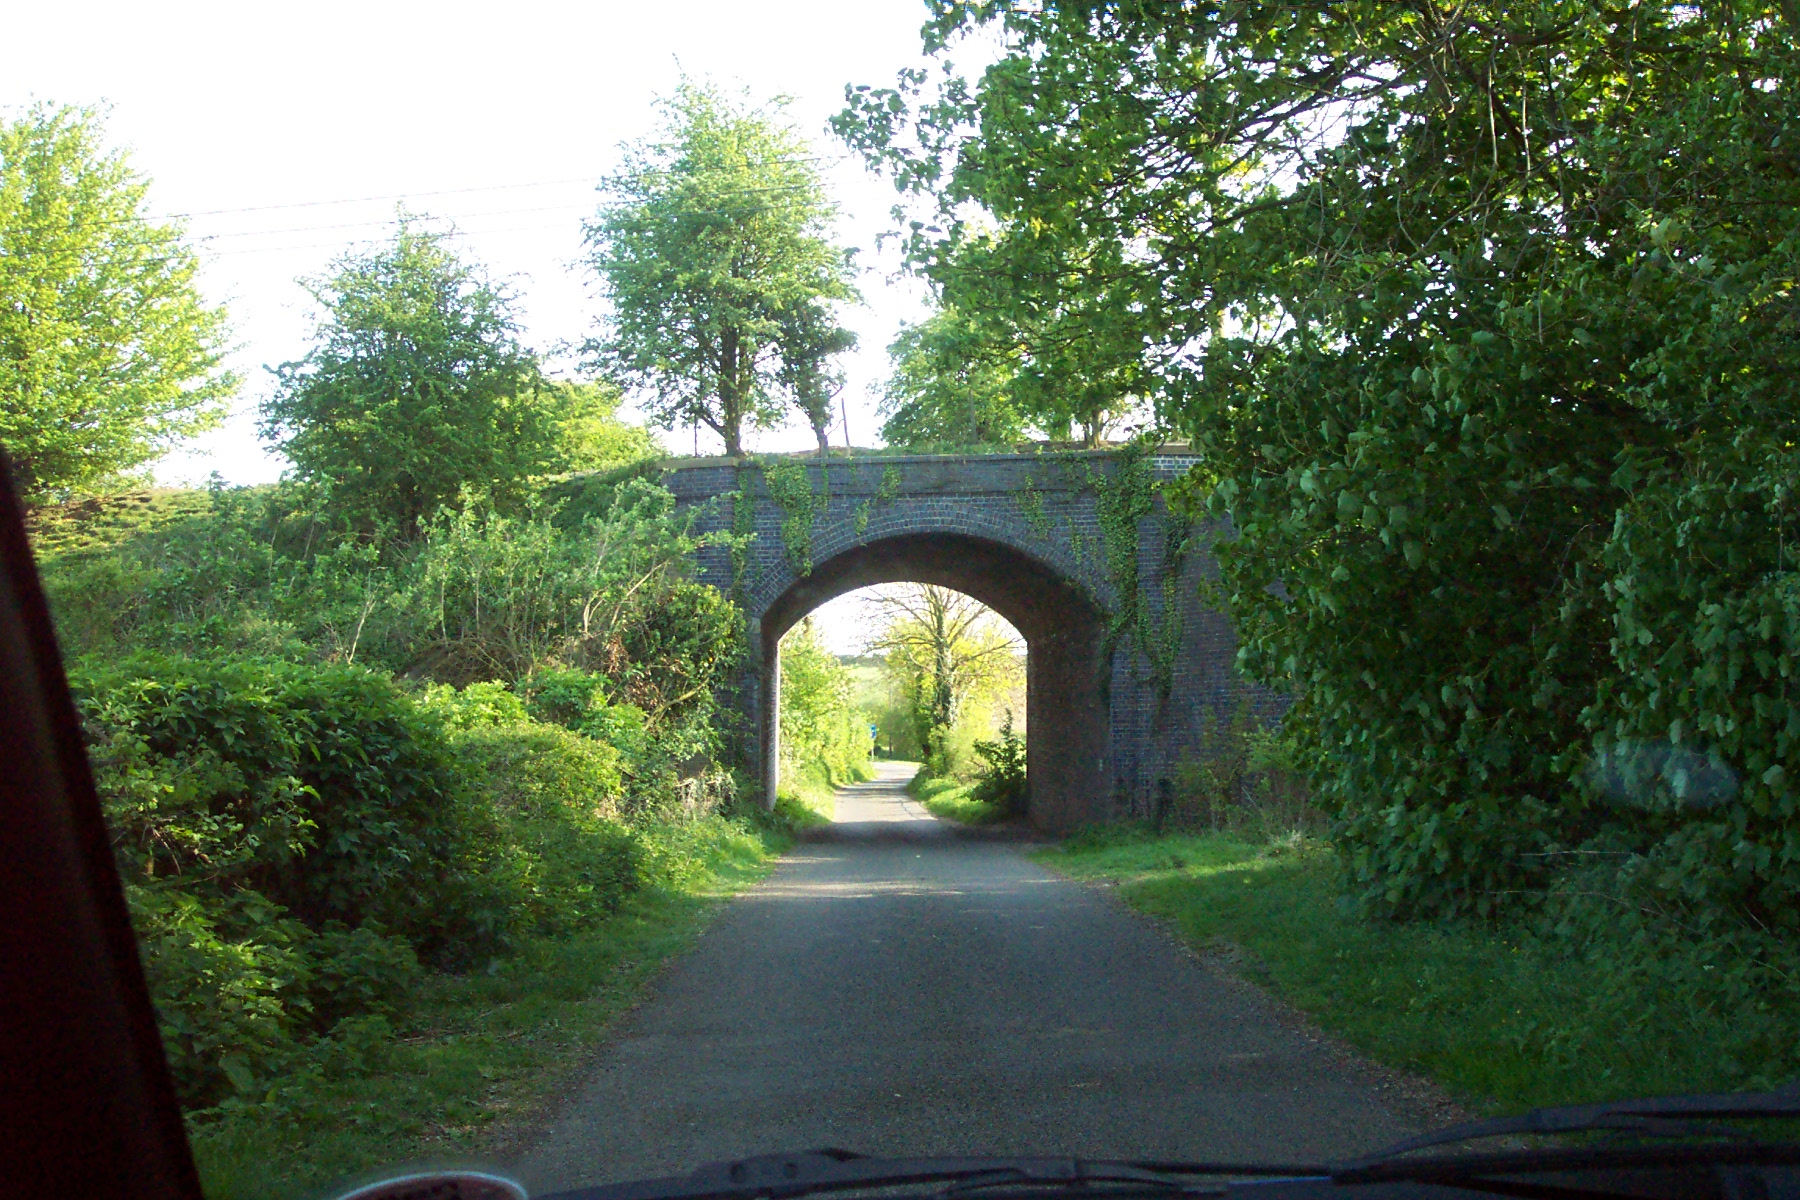 view through a vehicle window of a tunnel in the woods